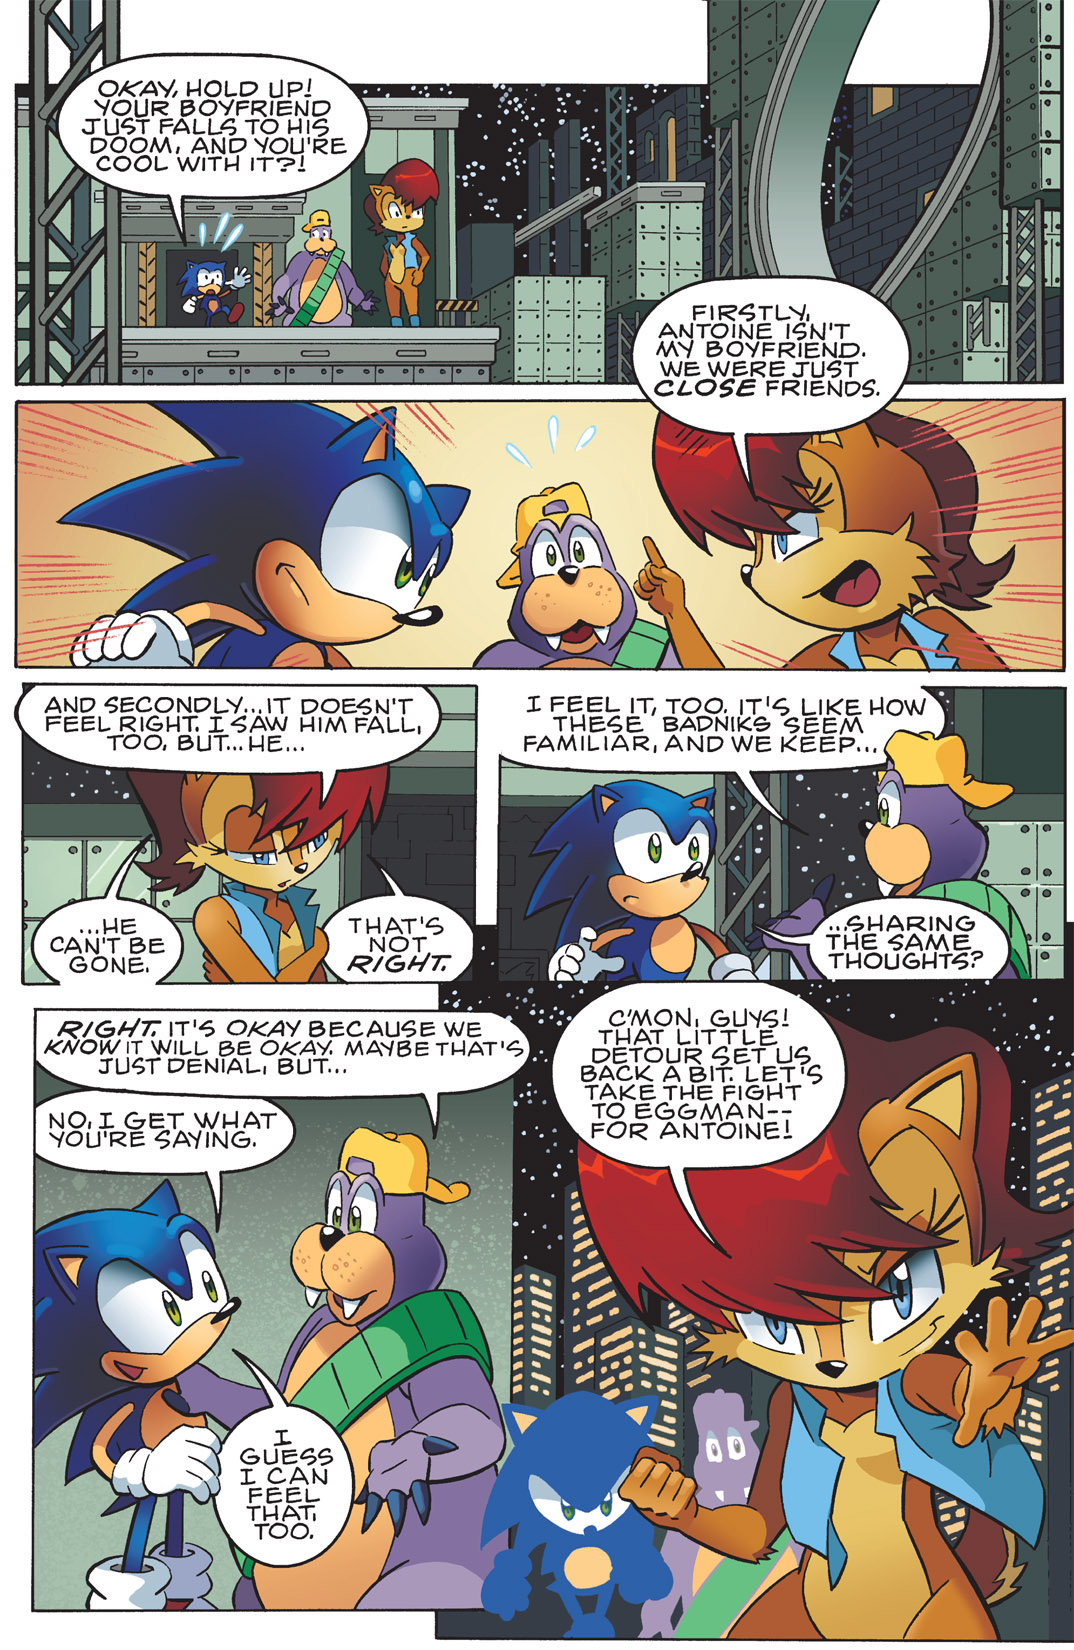 Sonic The Hedgehog (1993) 227 Page 11